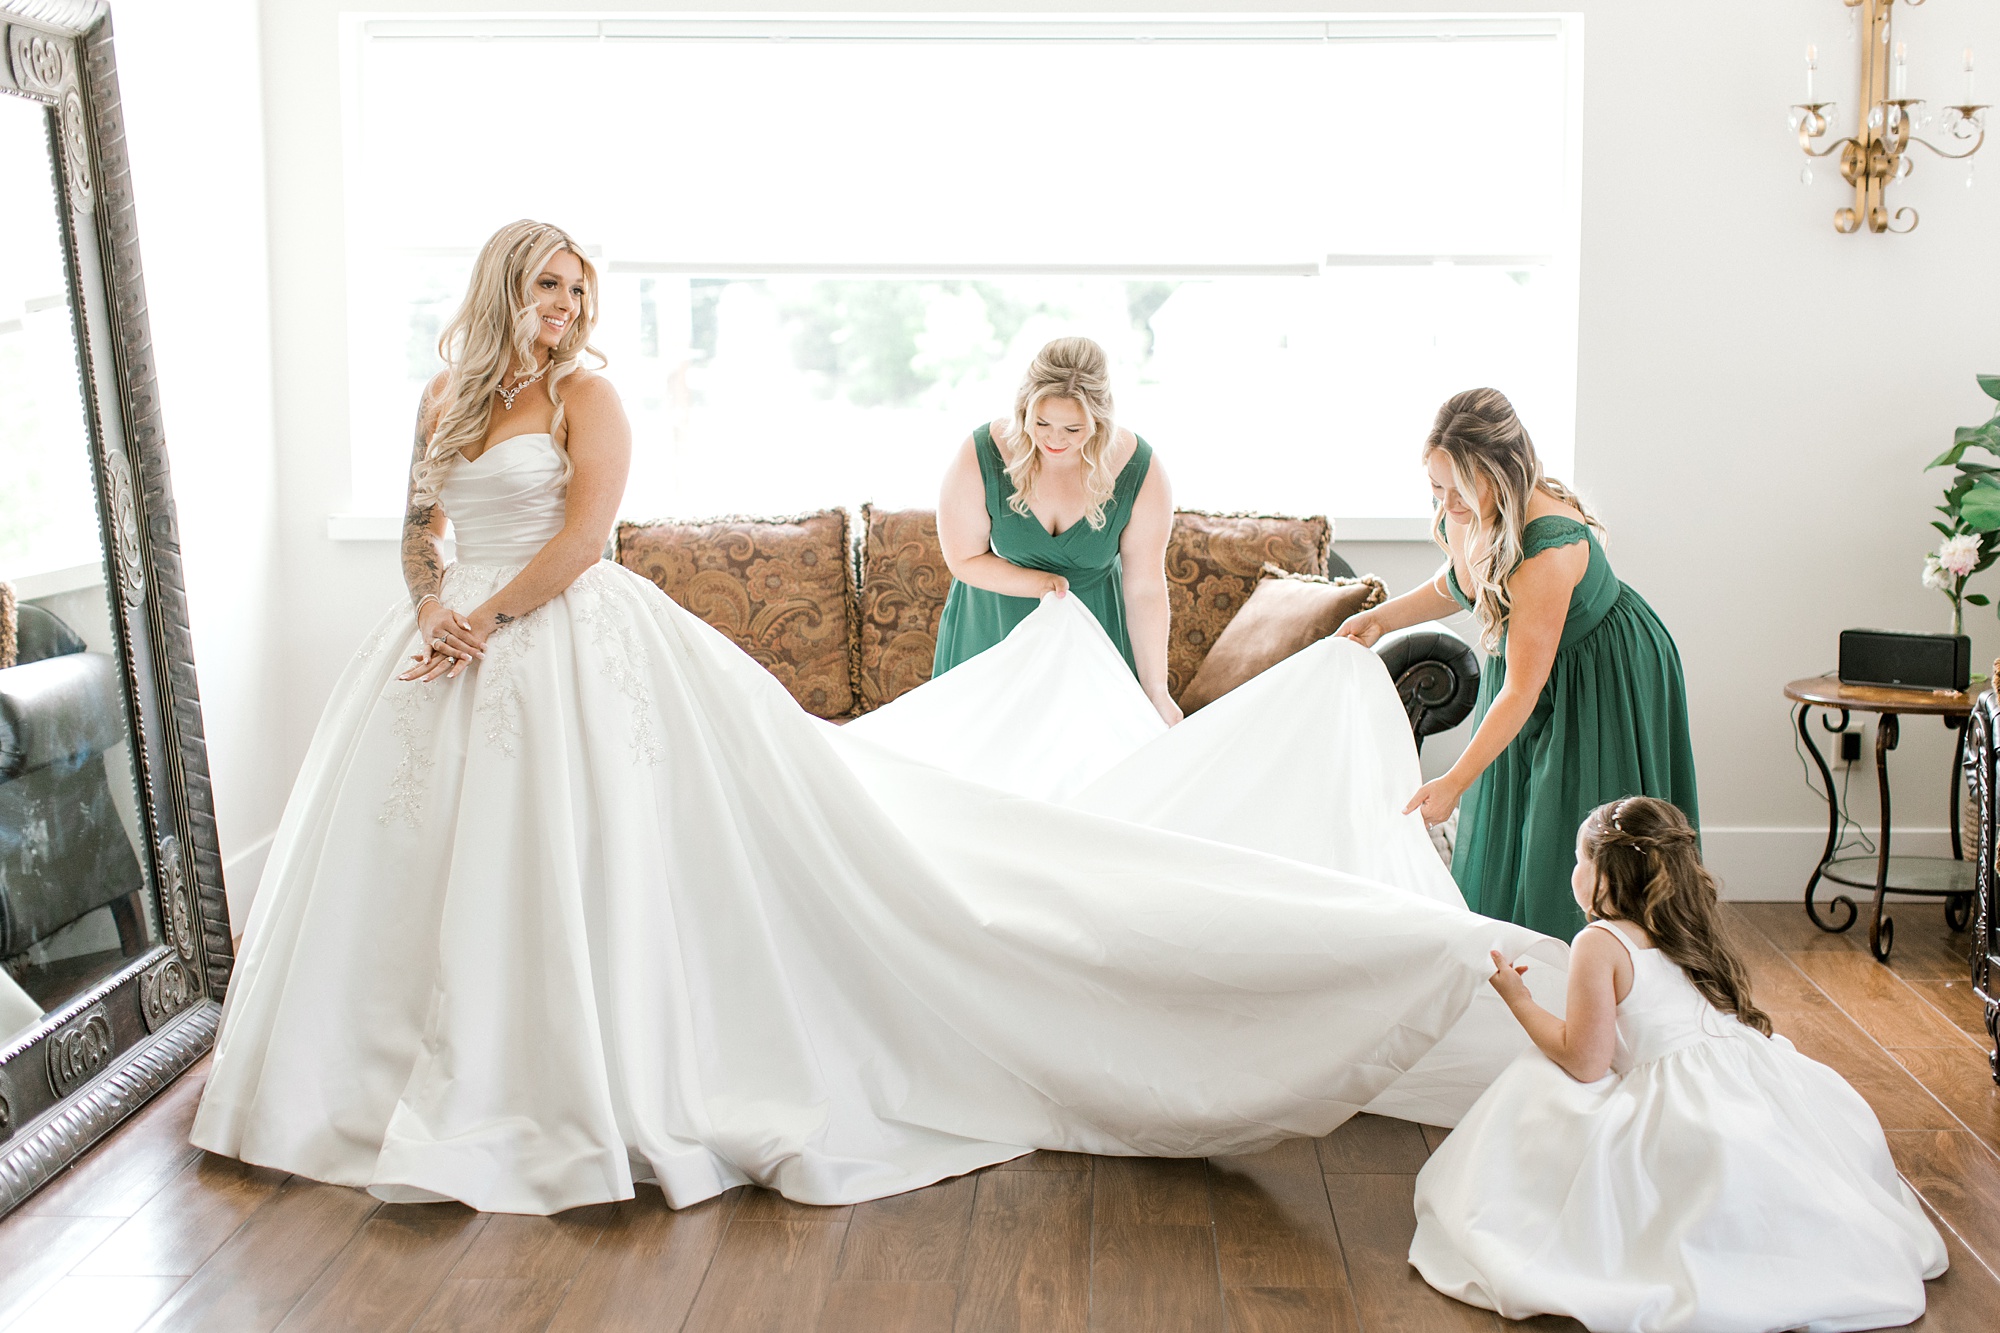 bridesmaids in green gowns pull out train on bride's wedding dress